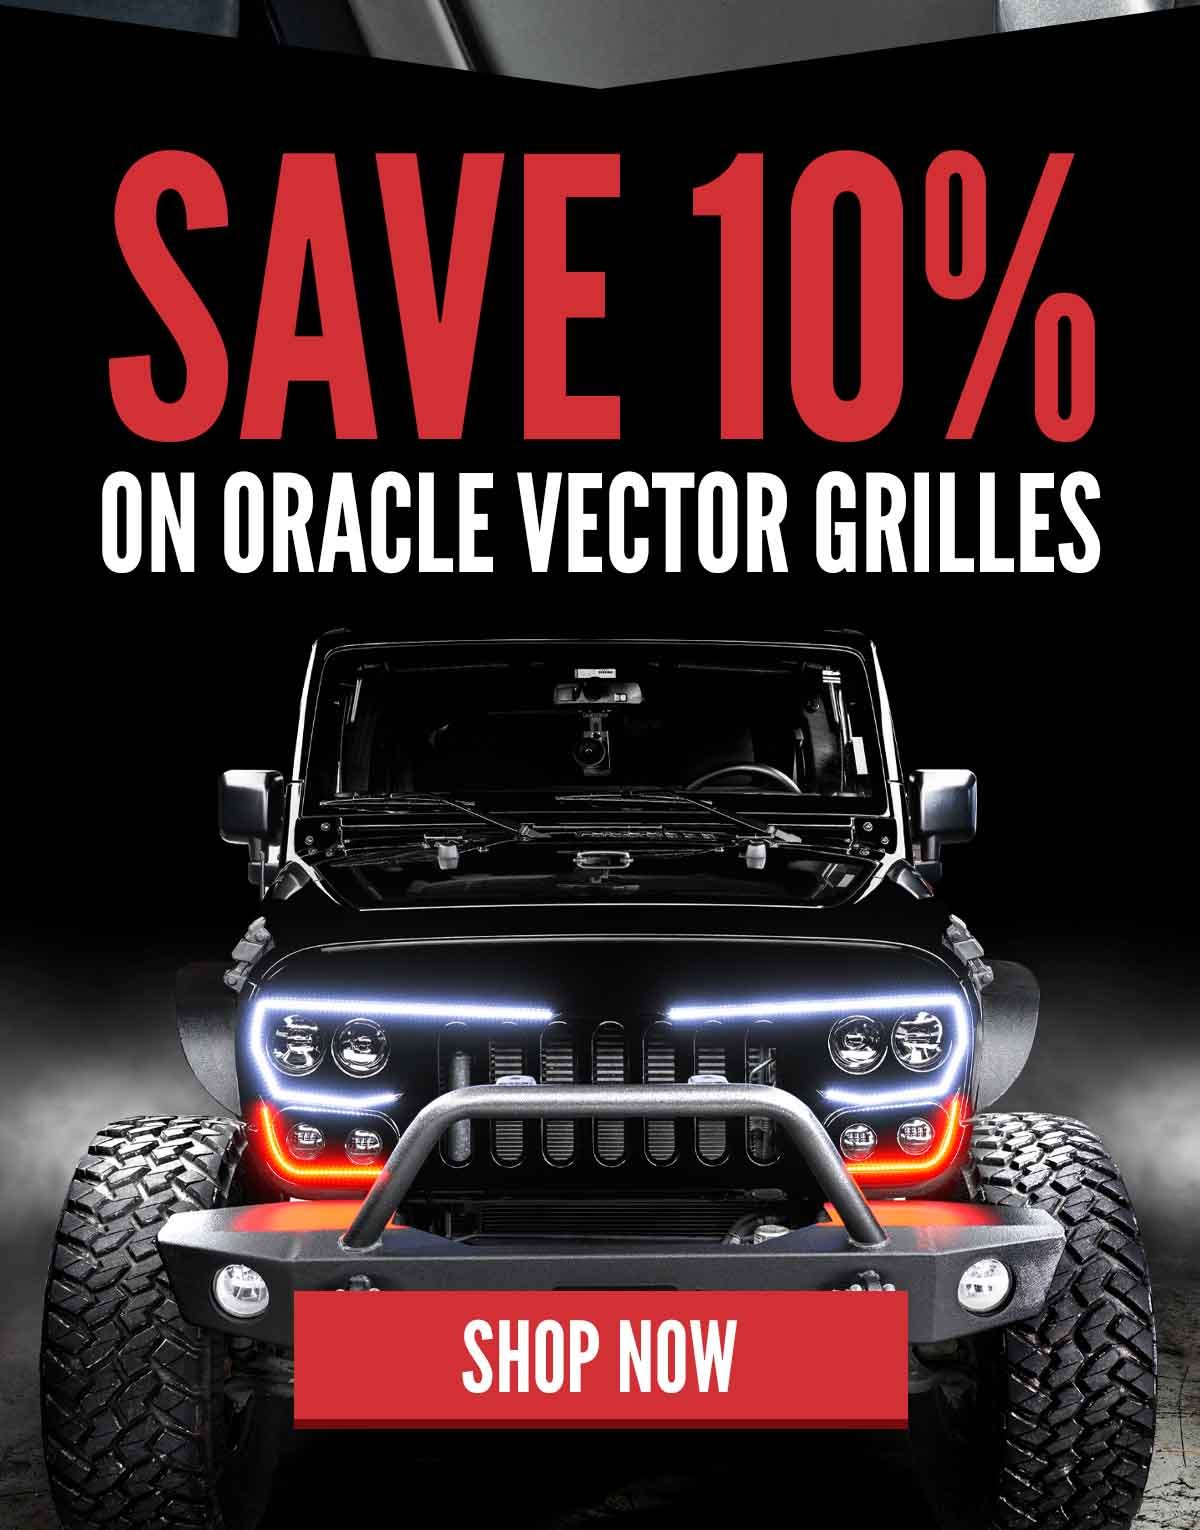 Save 10% On Oracle Vector Grilles